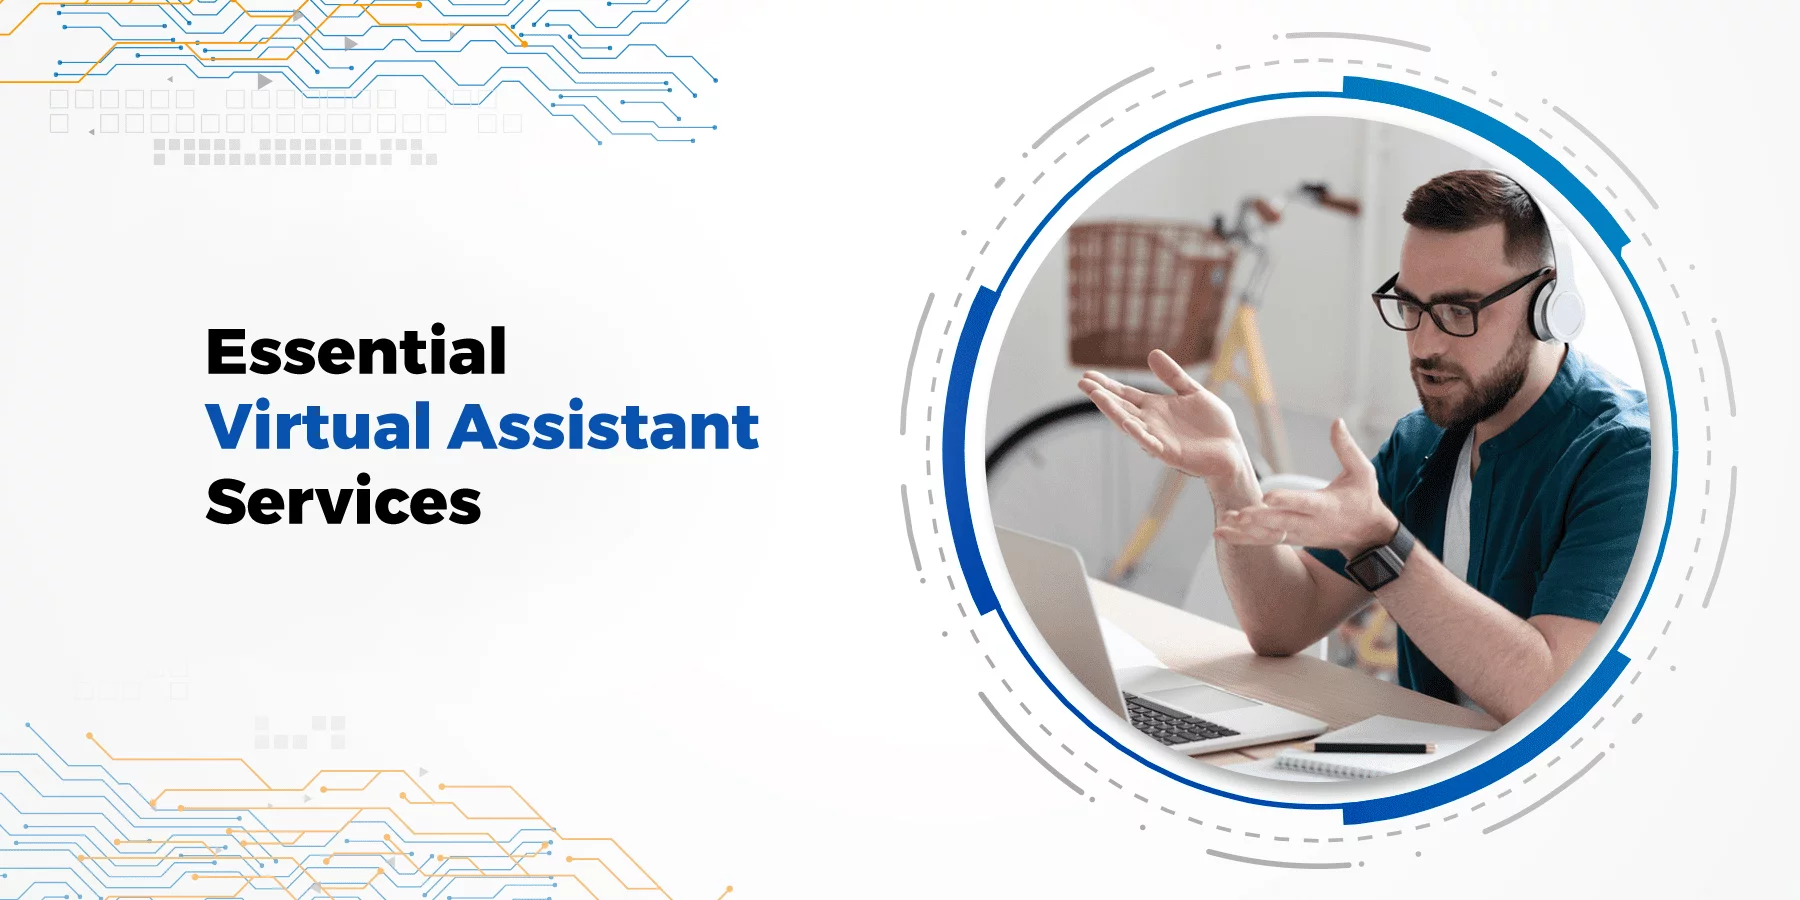 Your Workflow with Virtual Assistant Services